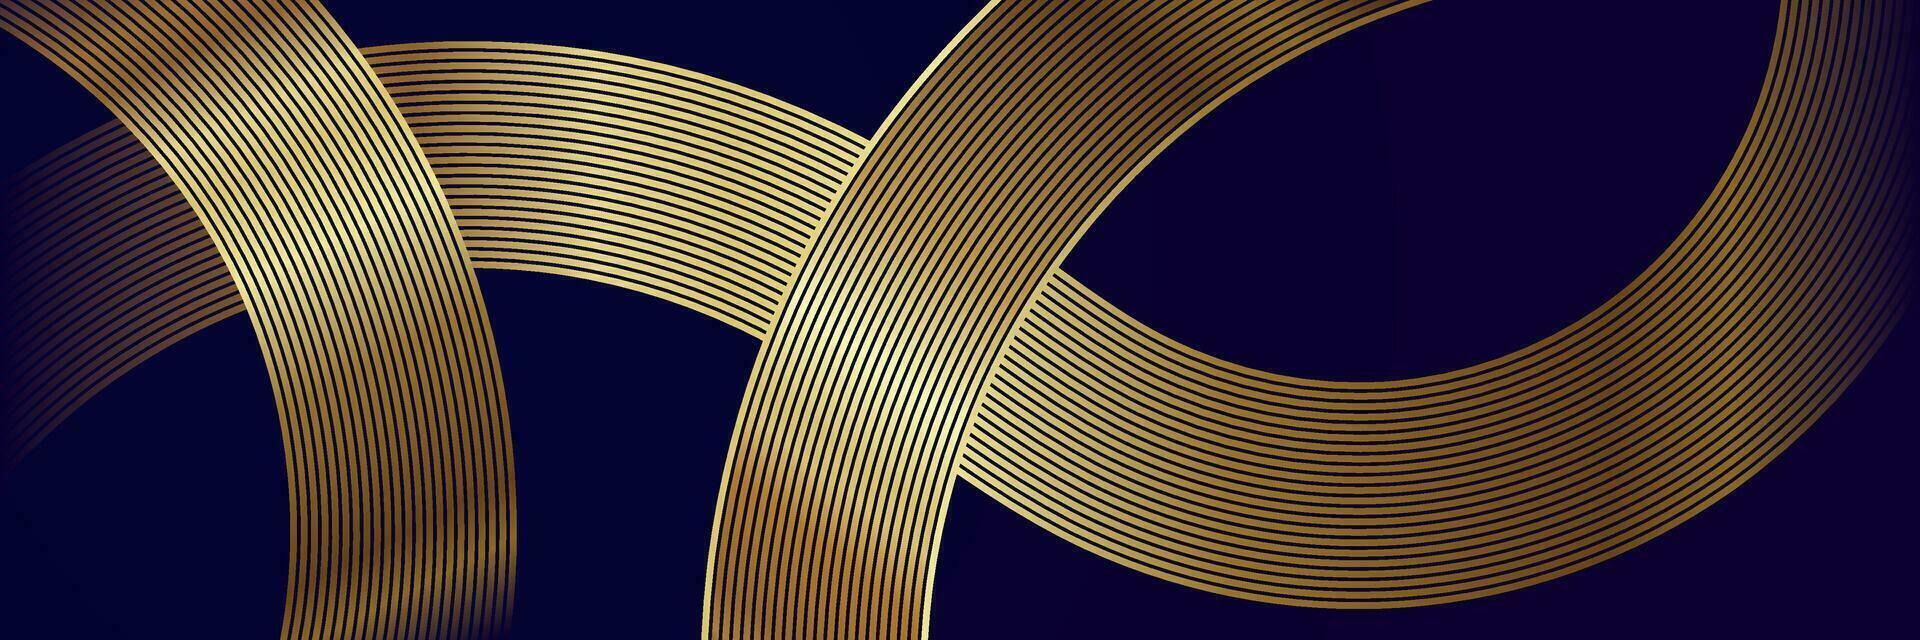 abstract dark elegant luxury background with gold lines vector